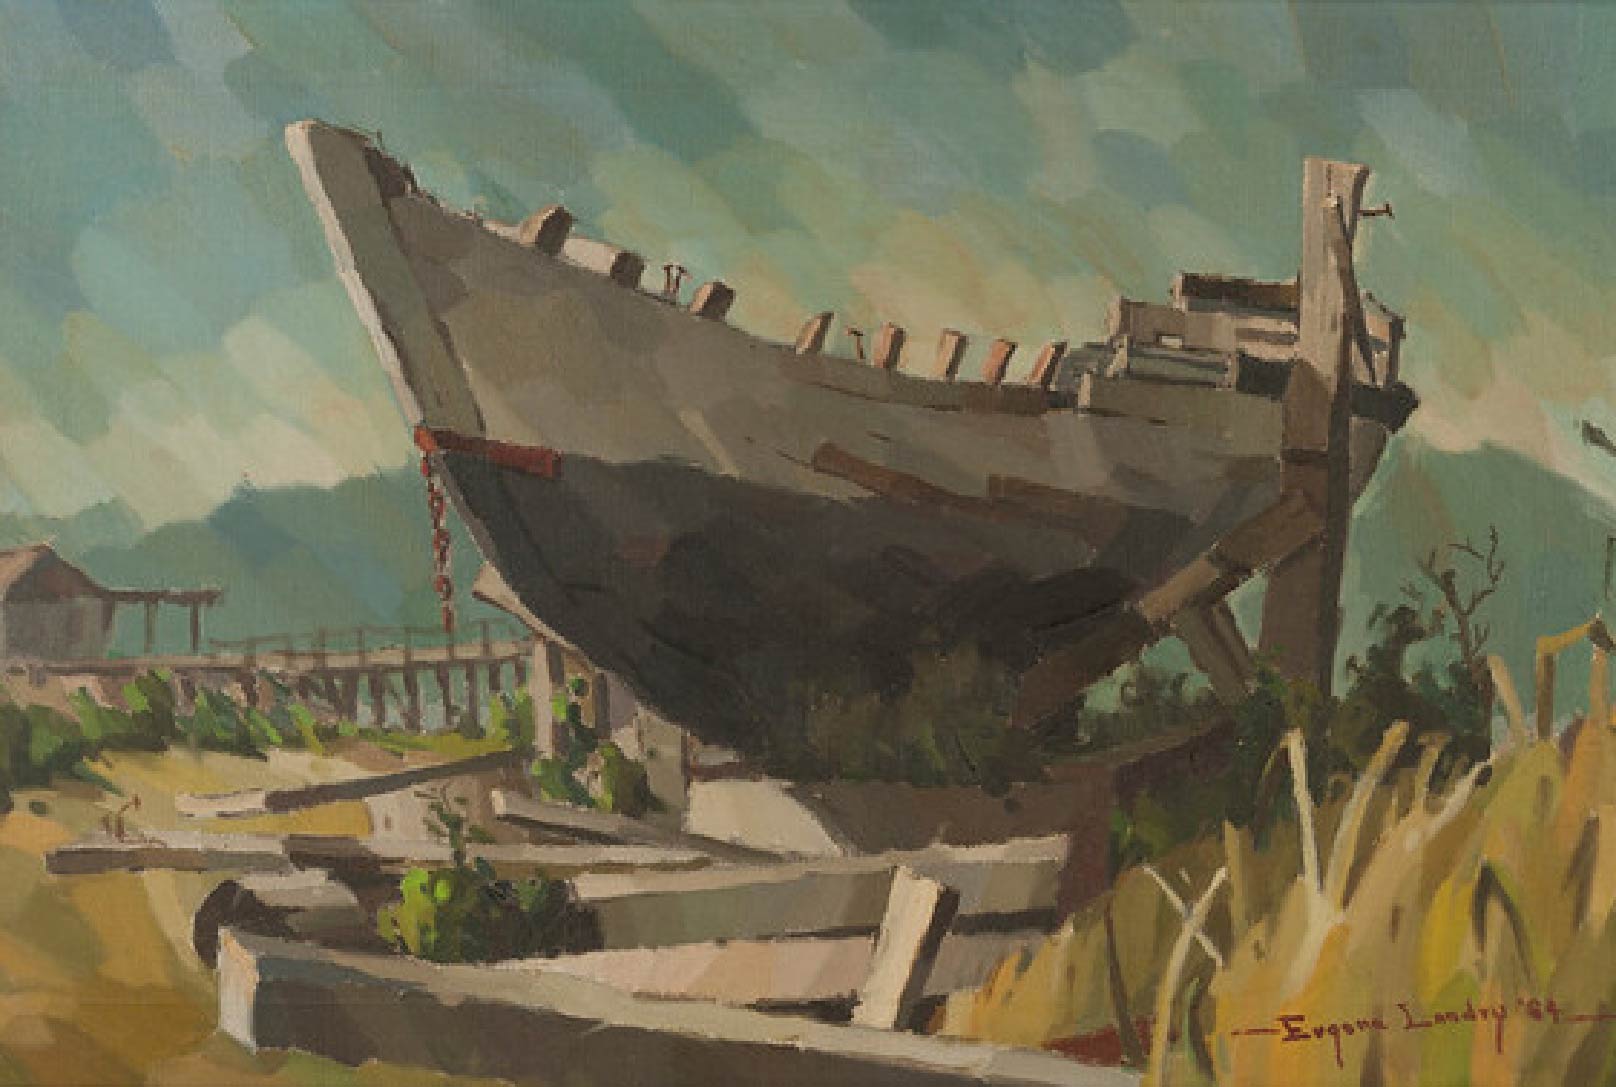 Boat at Toke Point: 1964, oil on canvas, 24”x30”